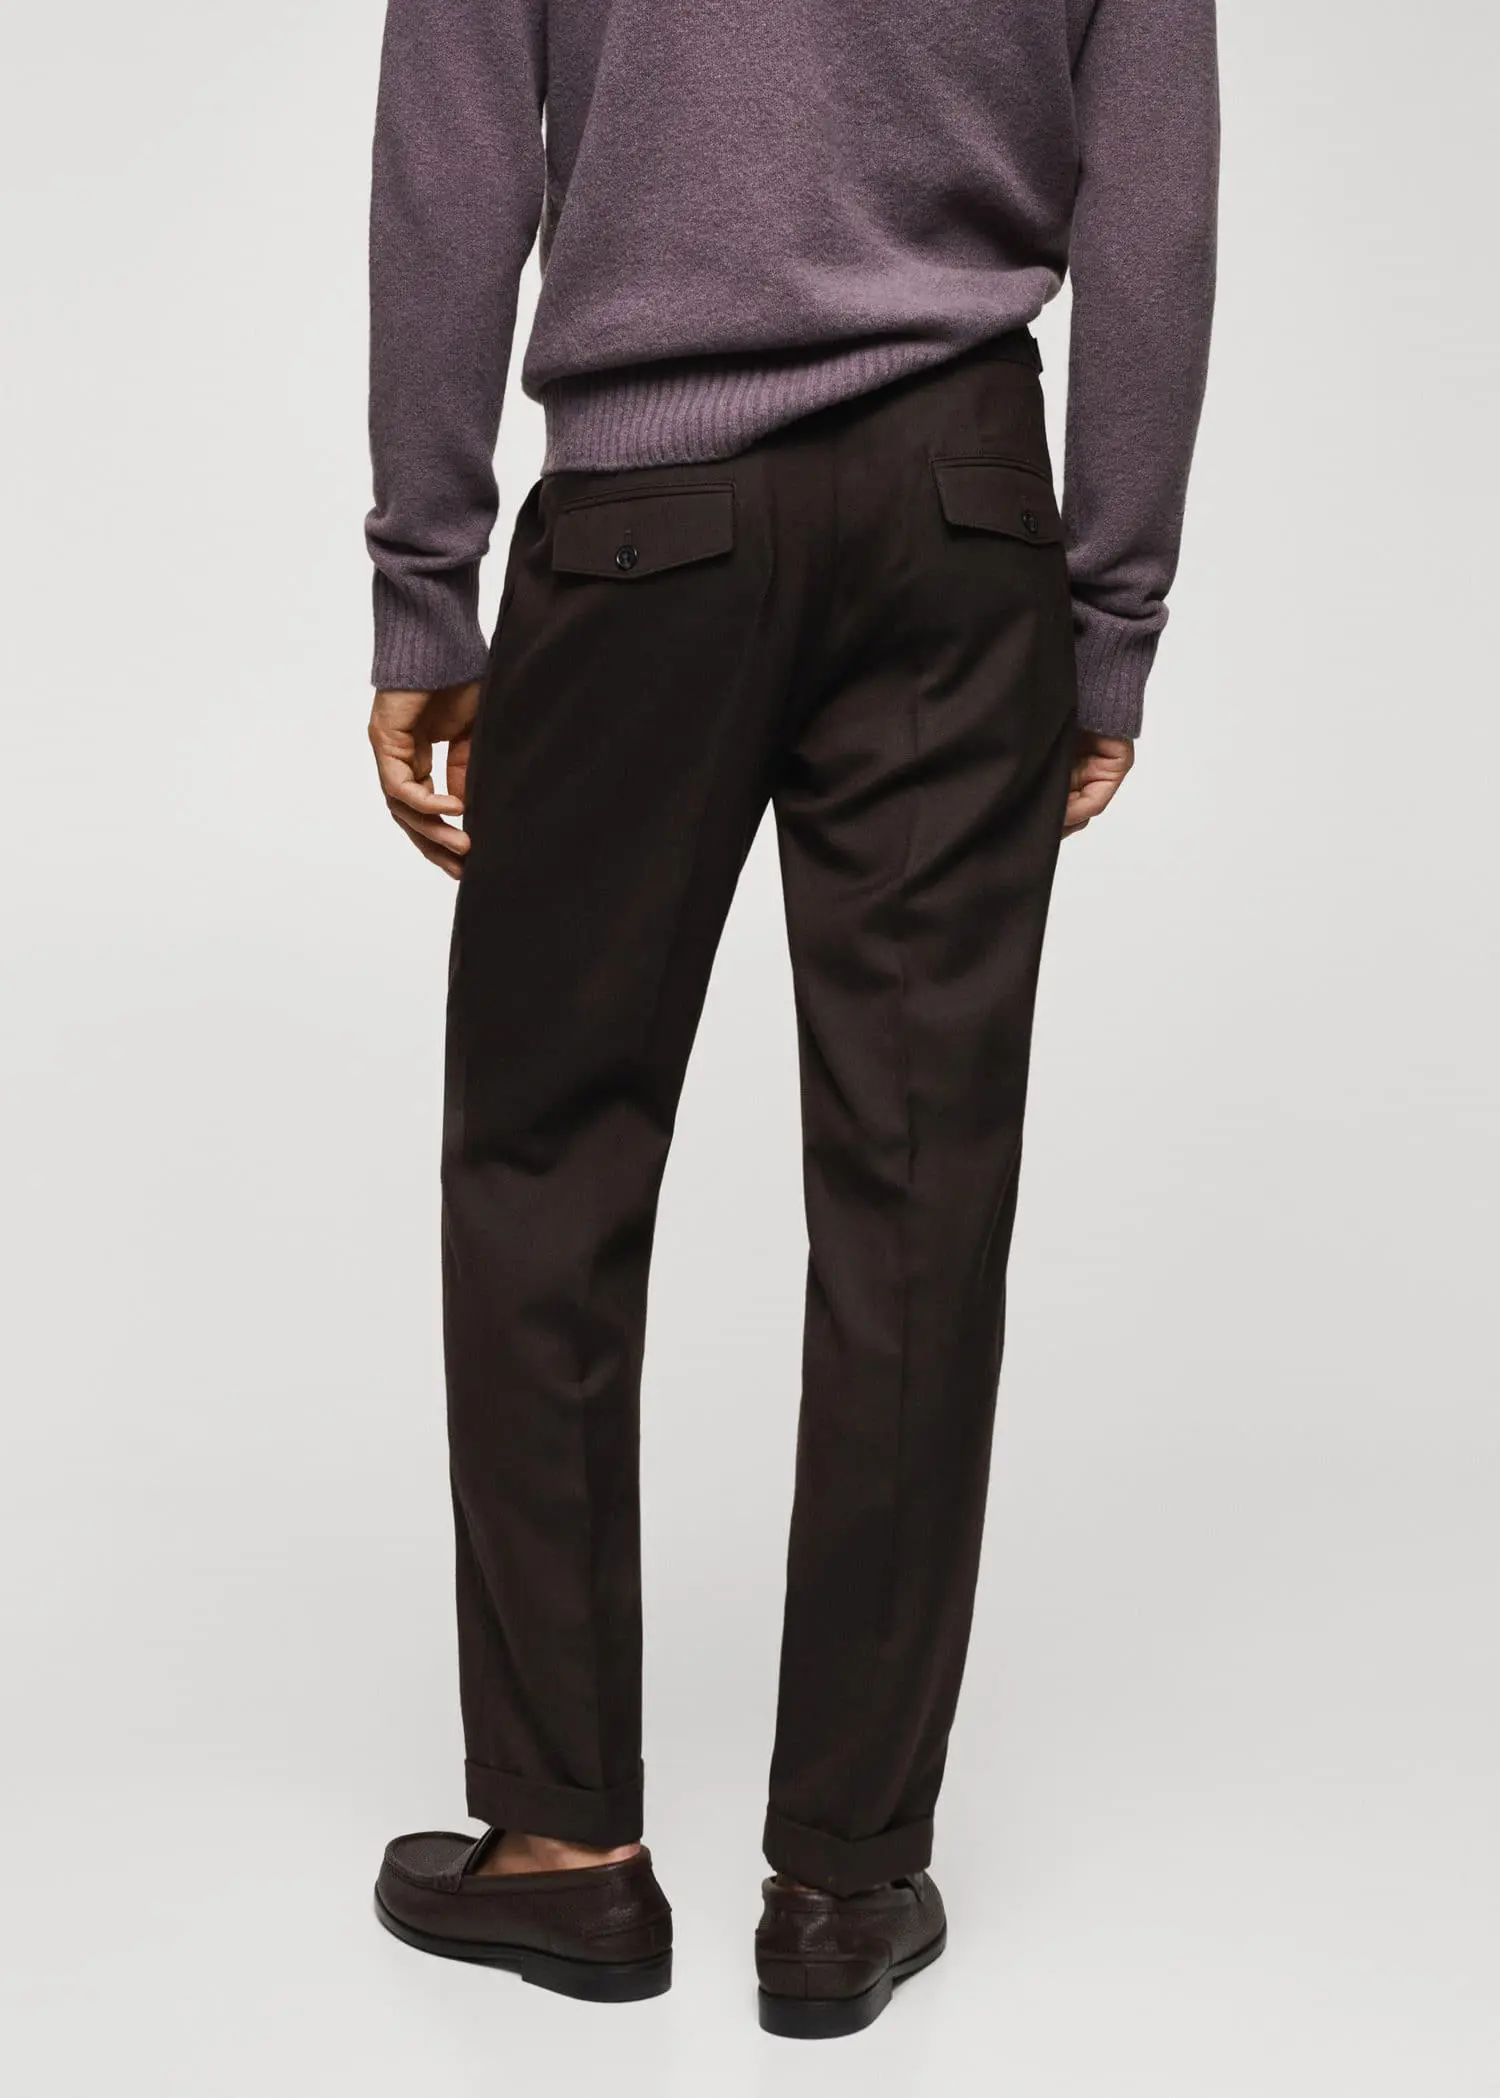 Mango Wool pants with pleats and loops. 3